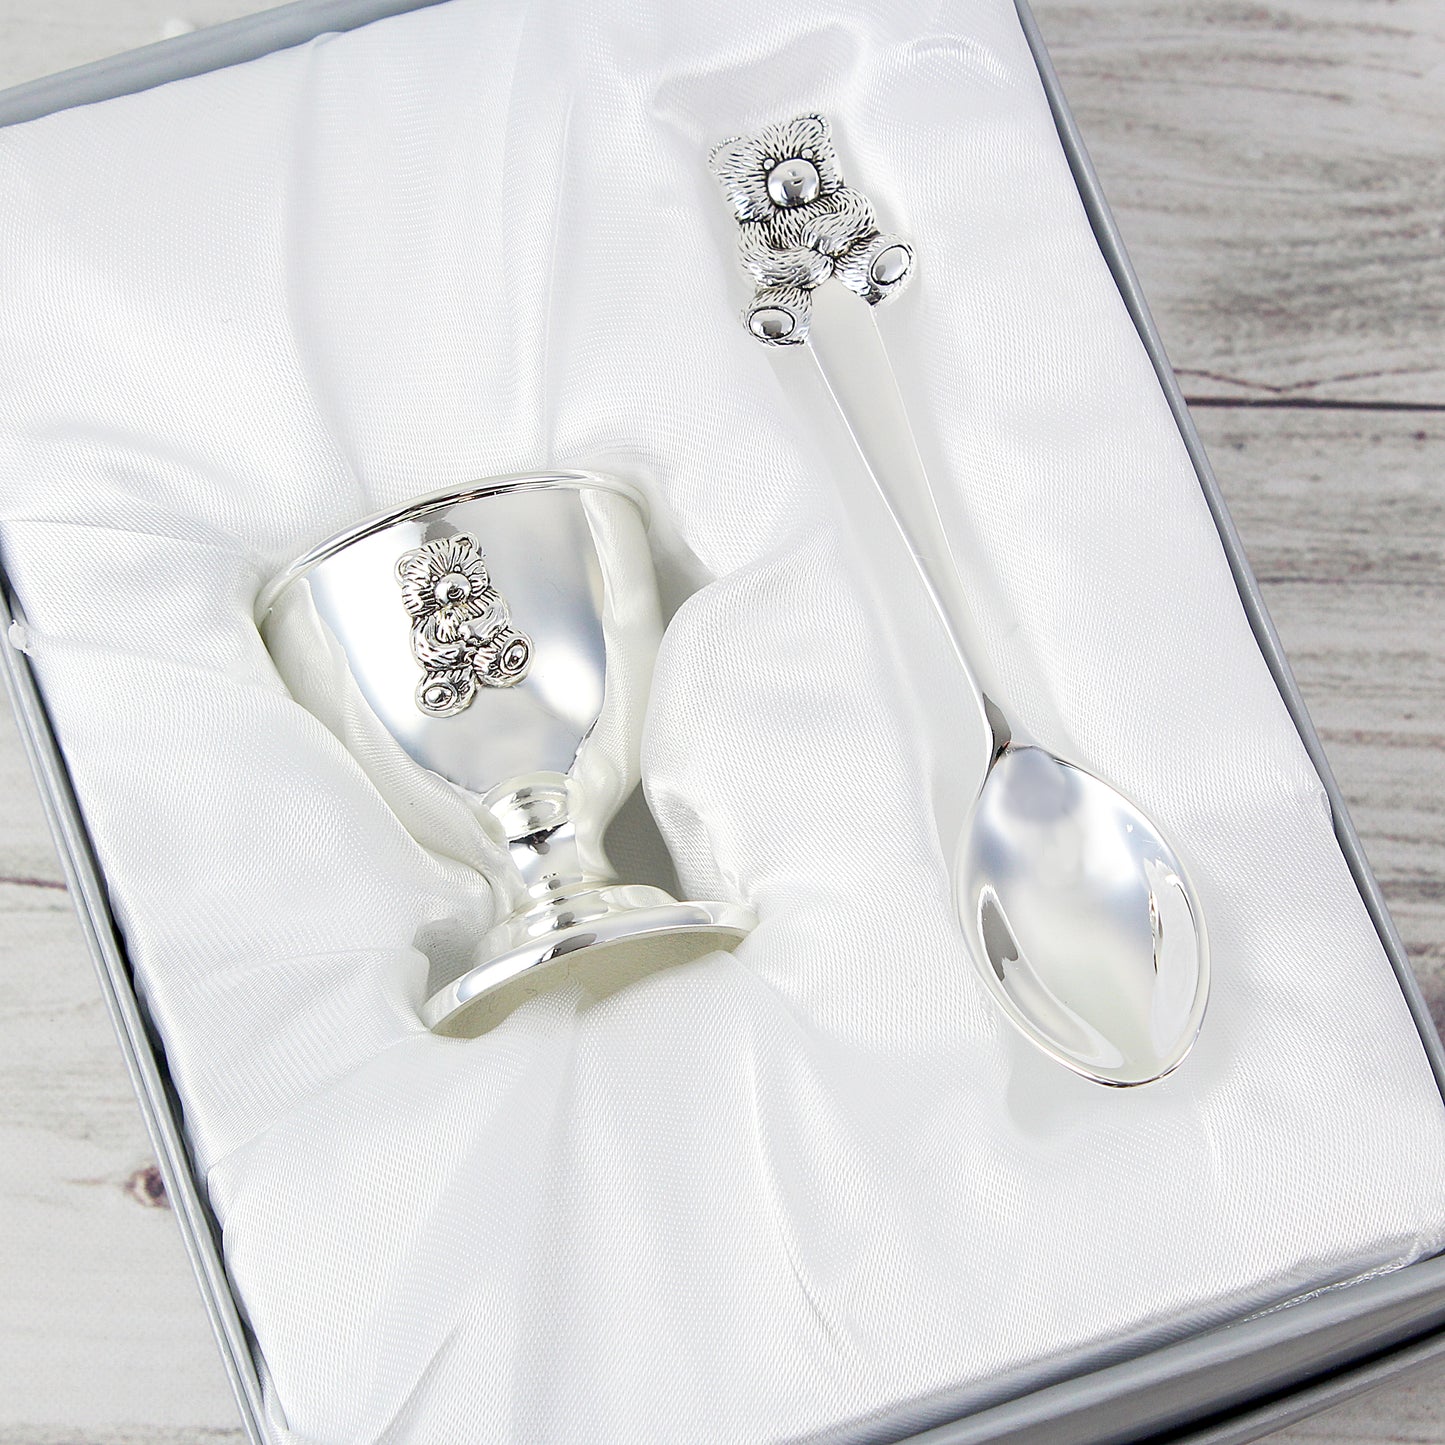 Personalised Silver Egg Cup & Spoon | Gift For Christening